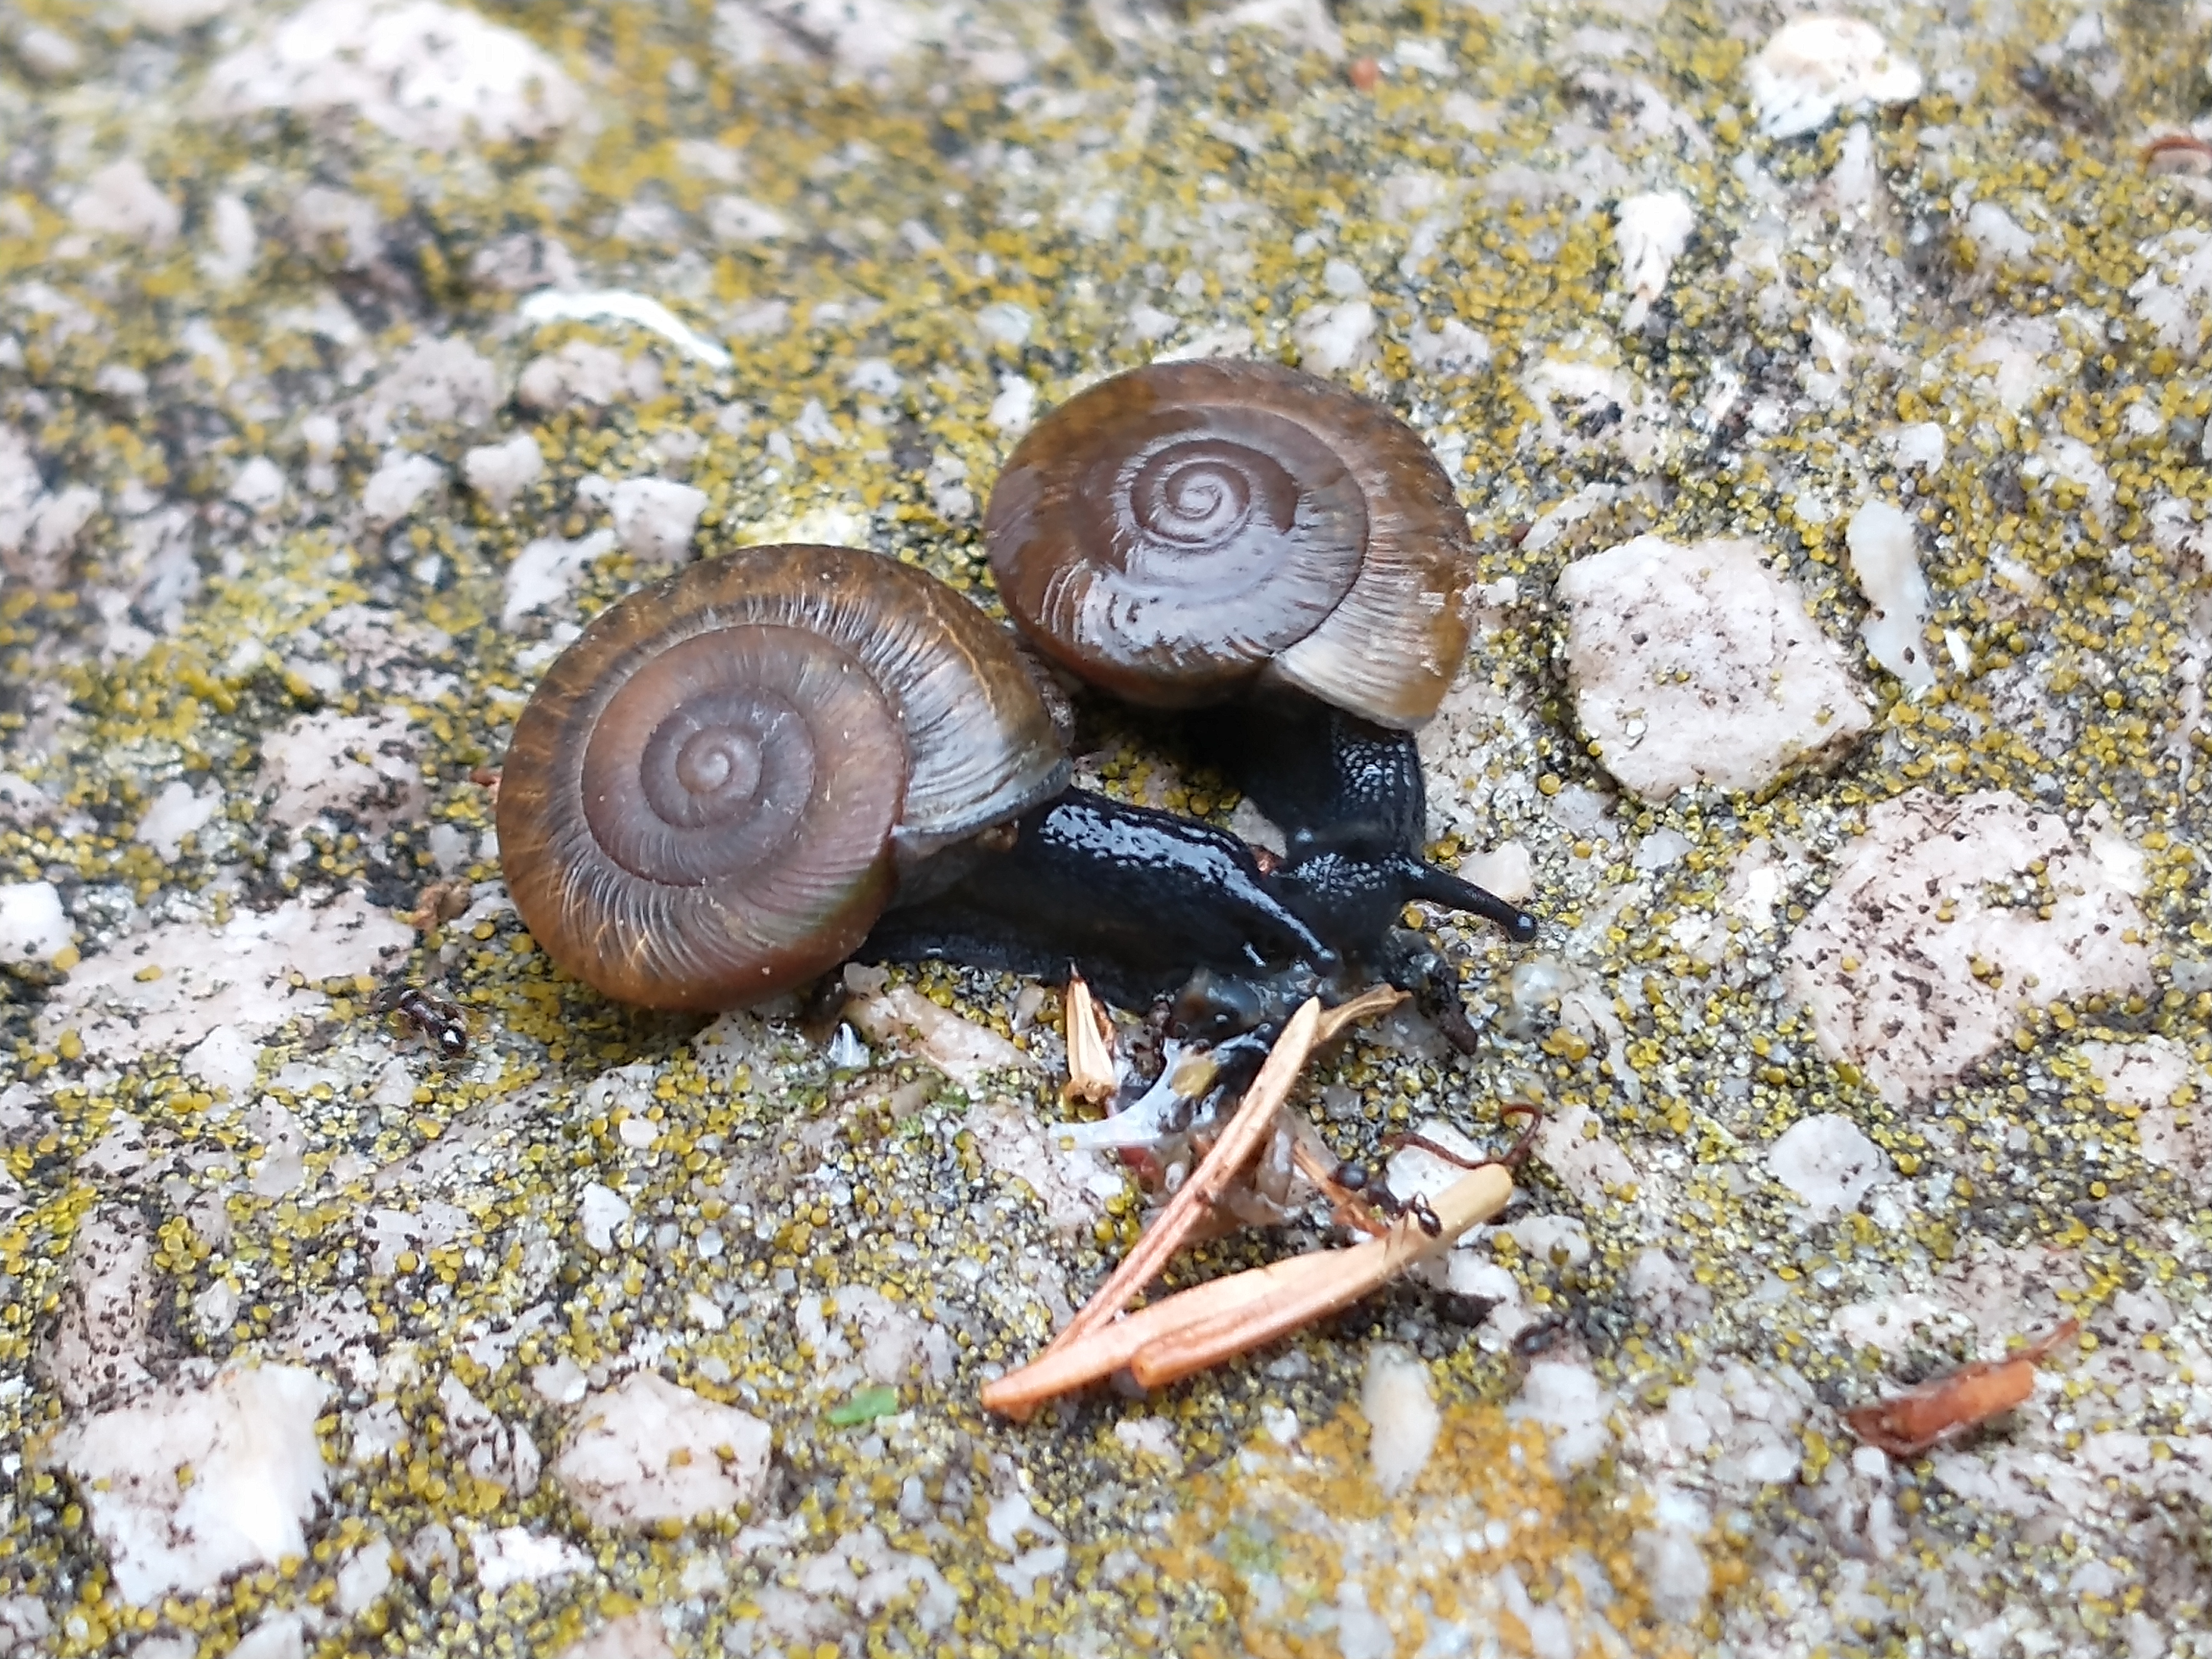 Two snails say hello to one another on top of a rock.